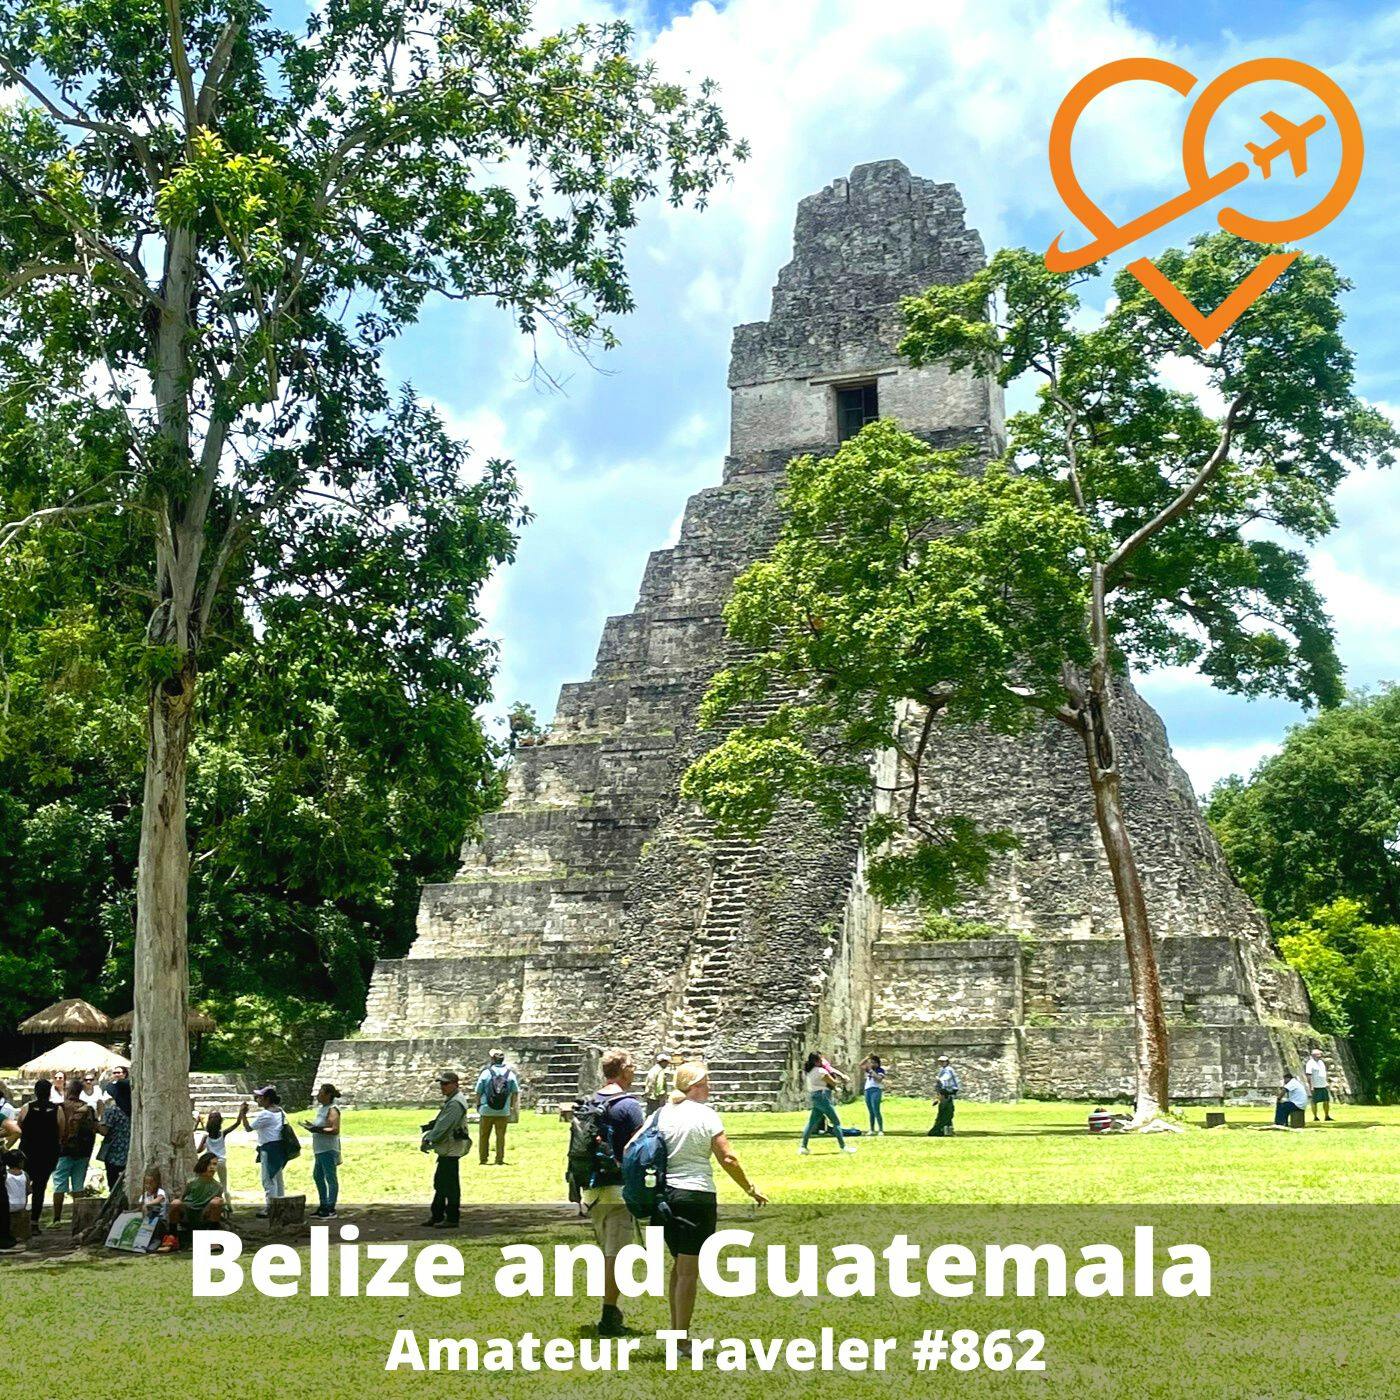 AT#862 - Travel to Belize and Guatemala